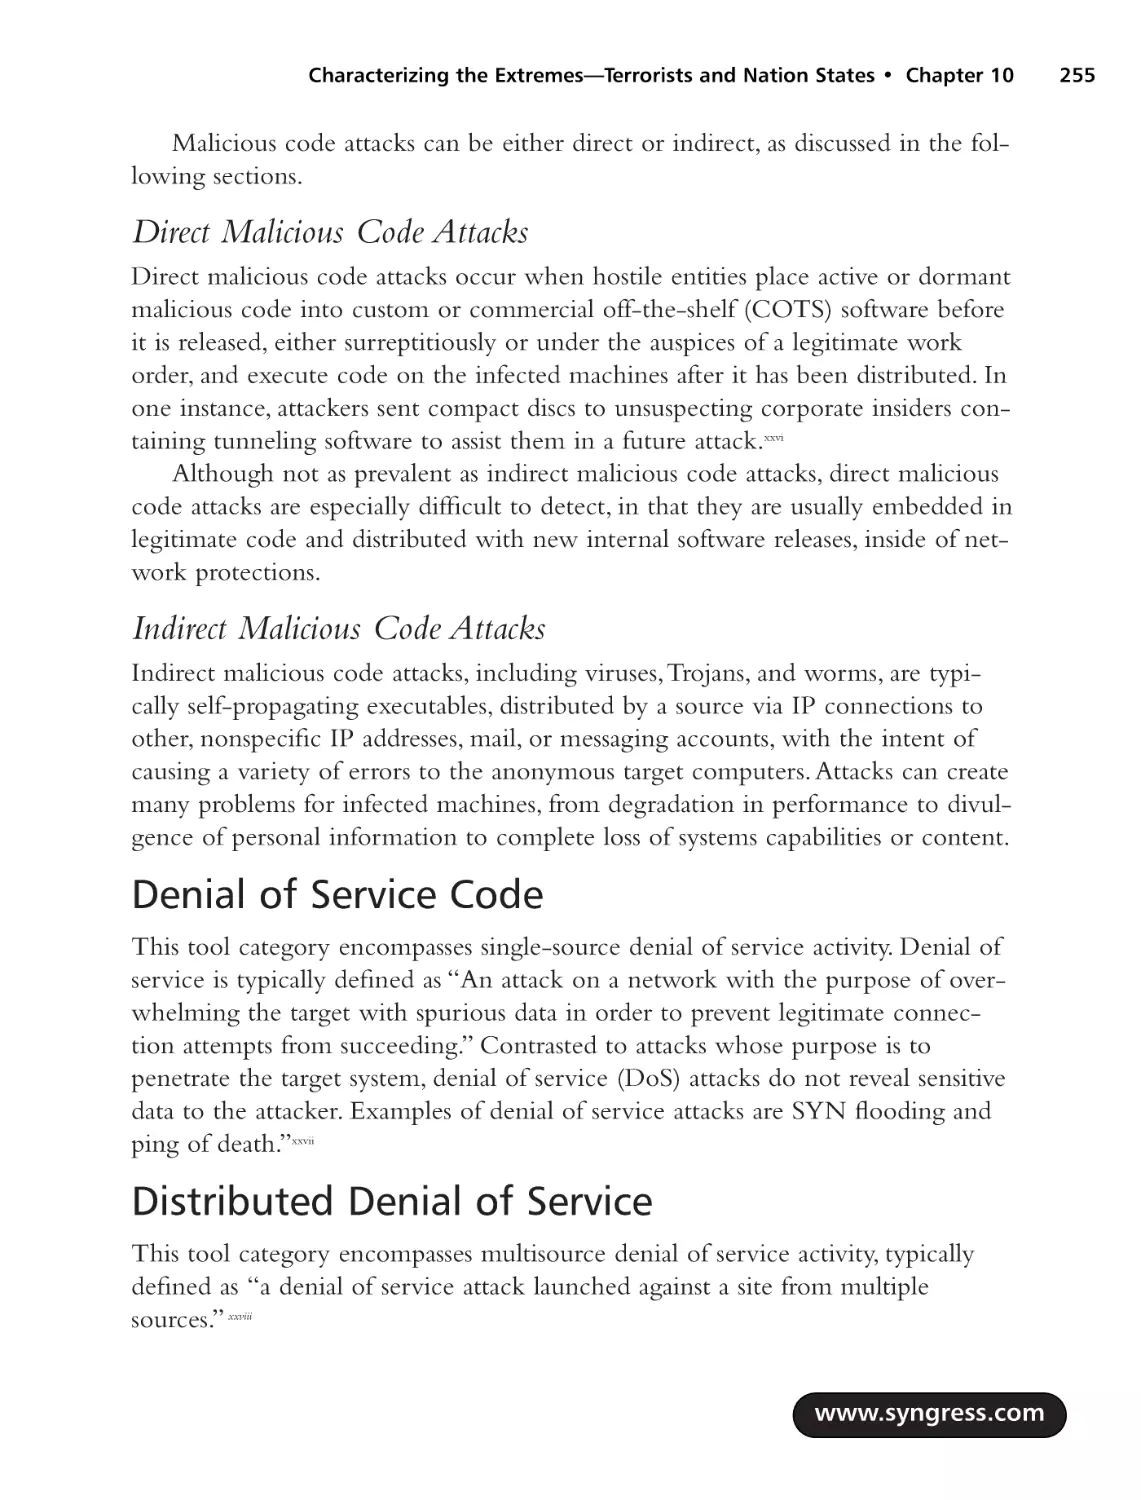 Denial of Service Code
Distributed Denial of Service